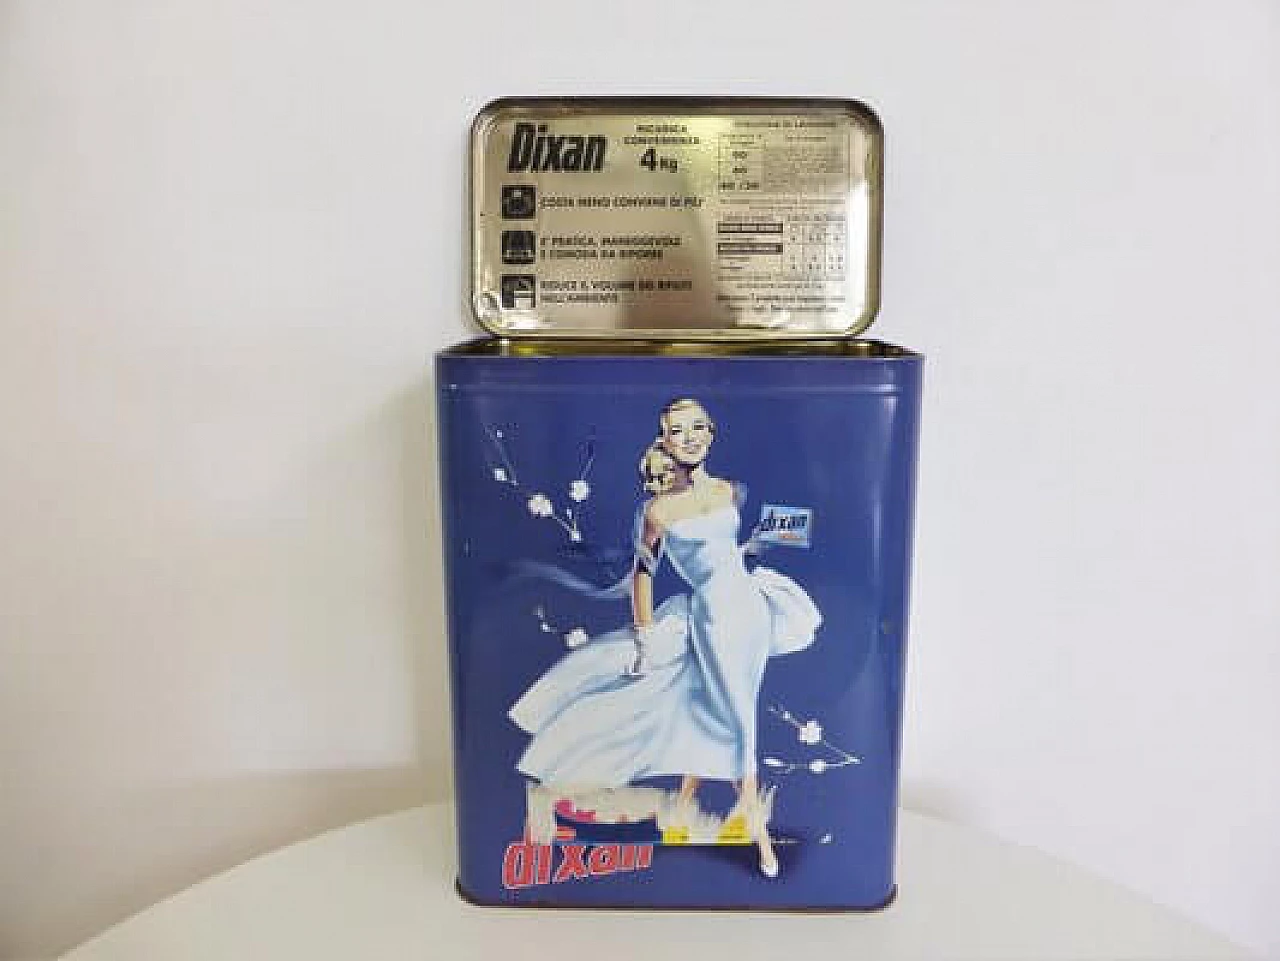 Dixan soap container, 1950s 1407260